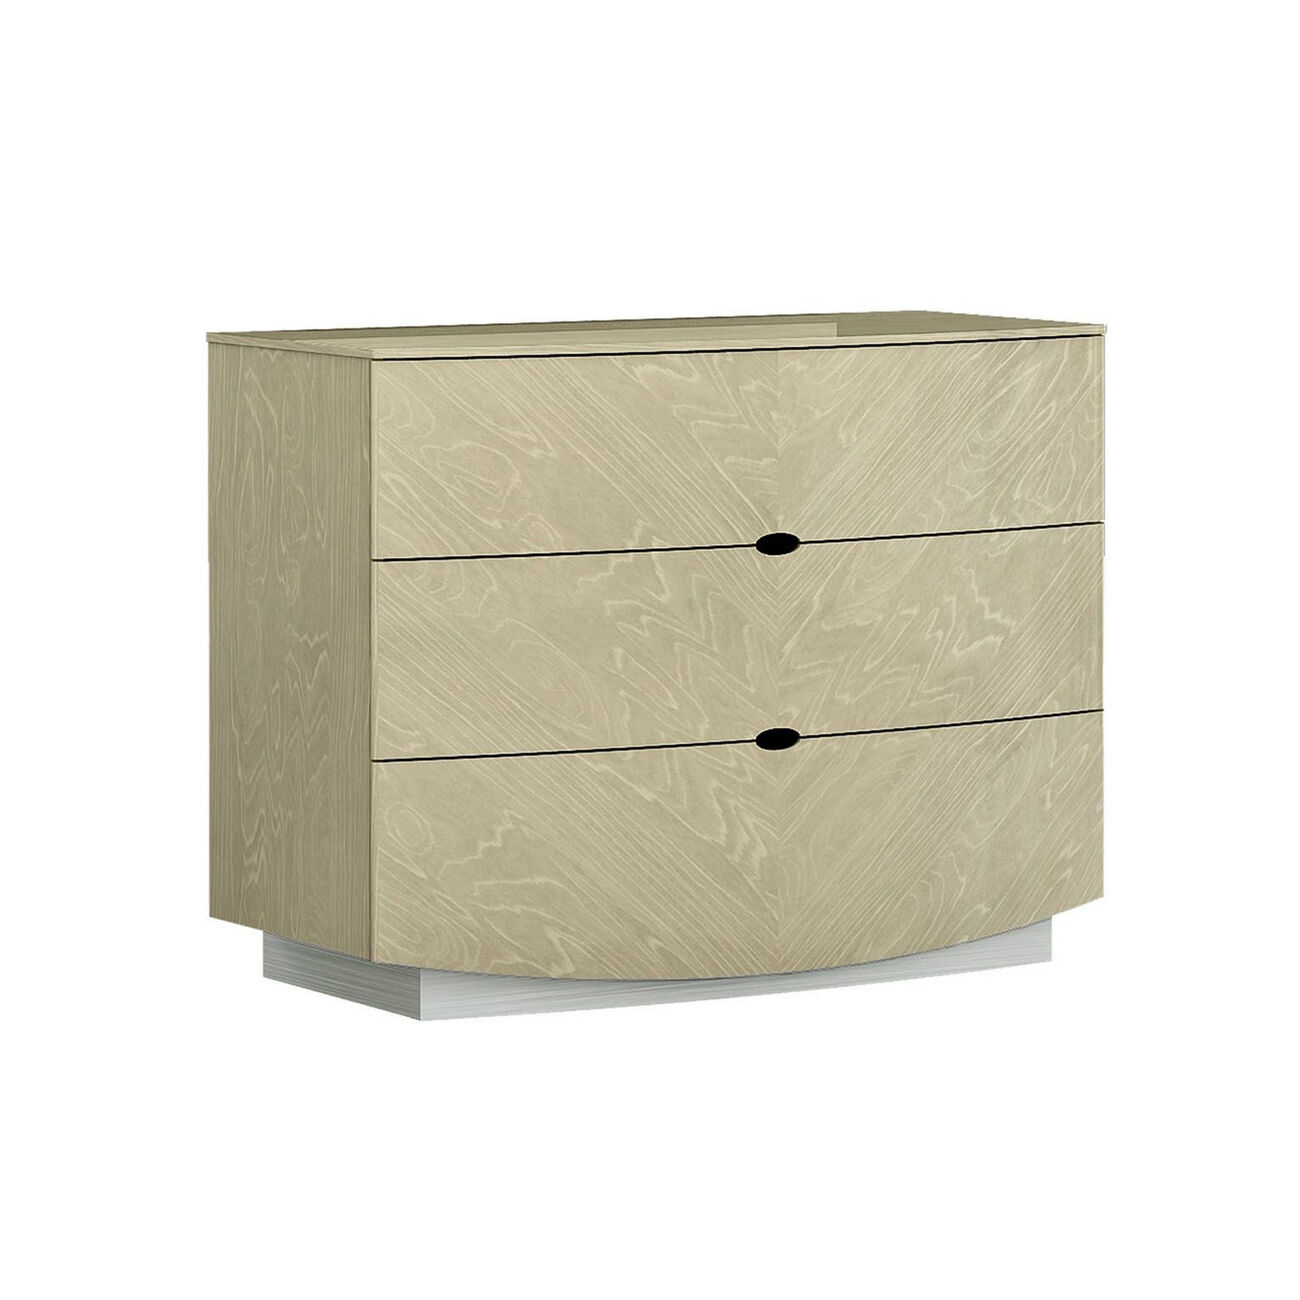 Curved Design Wooden Dresser with Trim Base and 3 Drawers, Beige and White